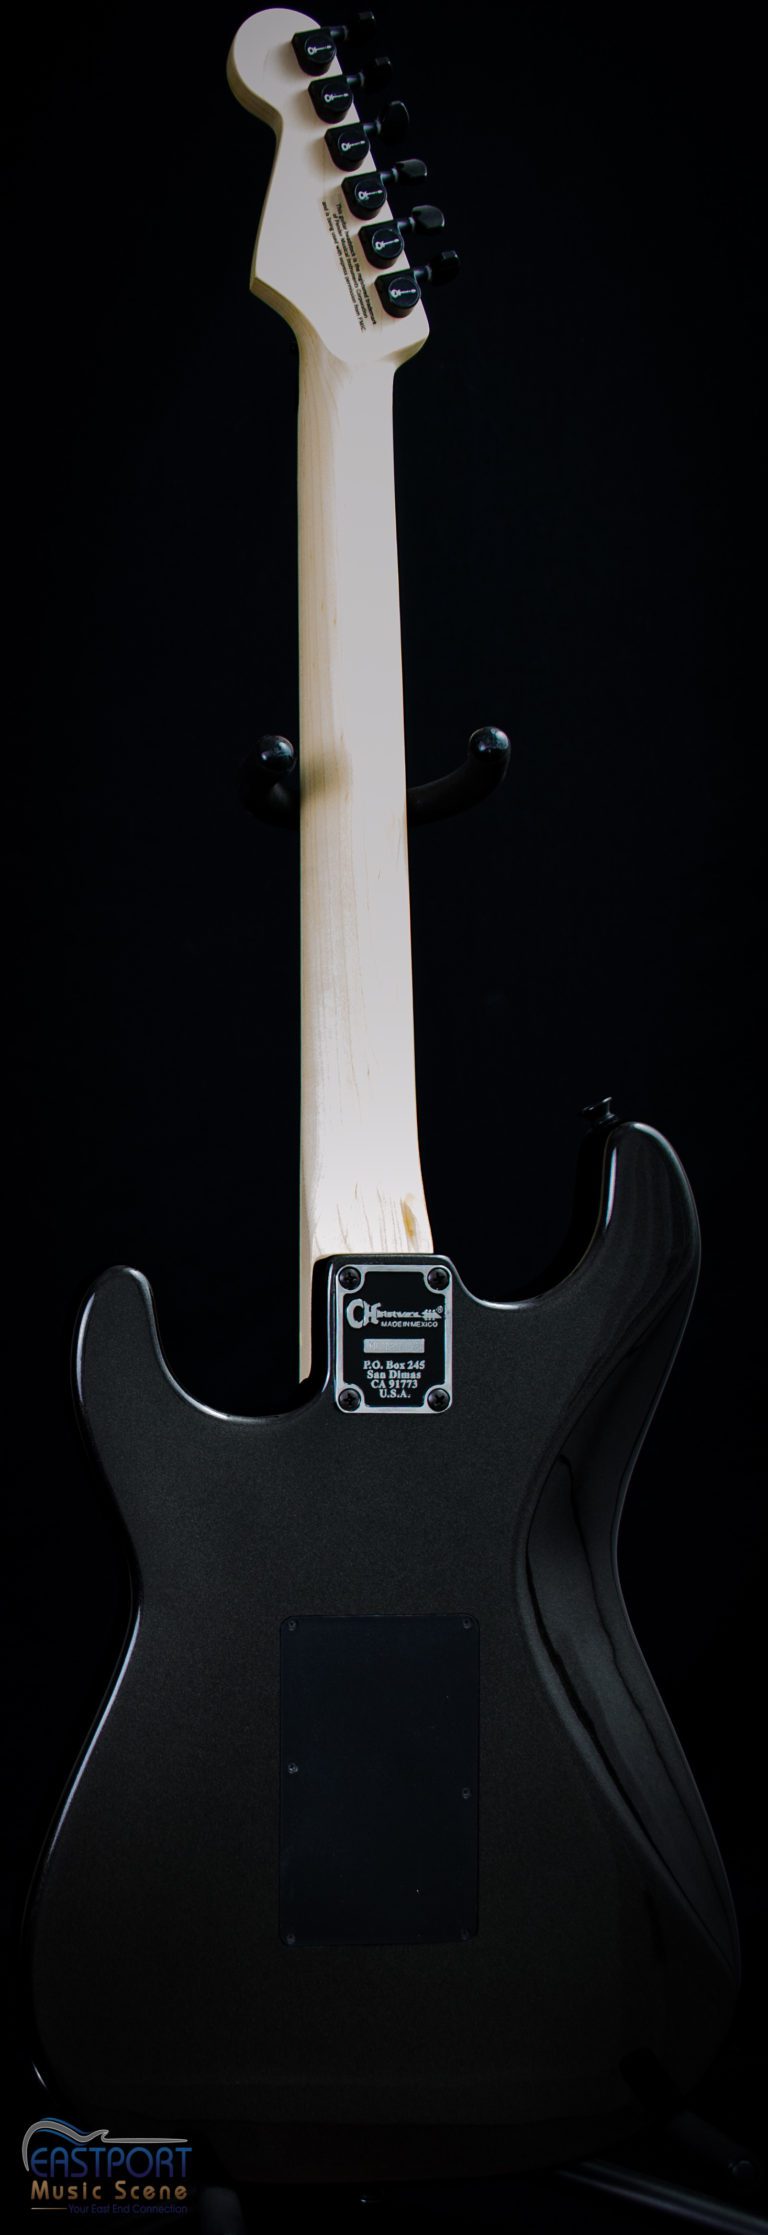 A black electric guitar with white strings and a white handle.